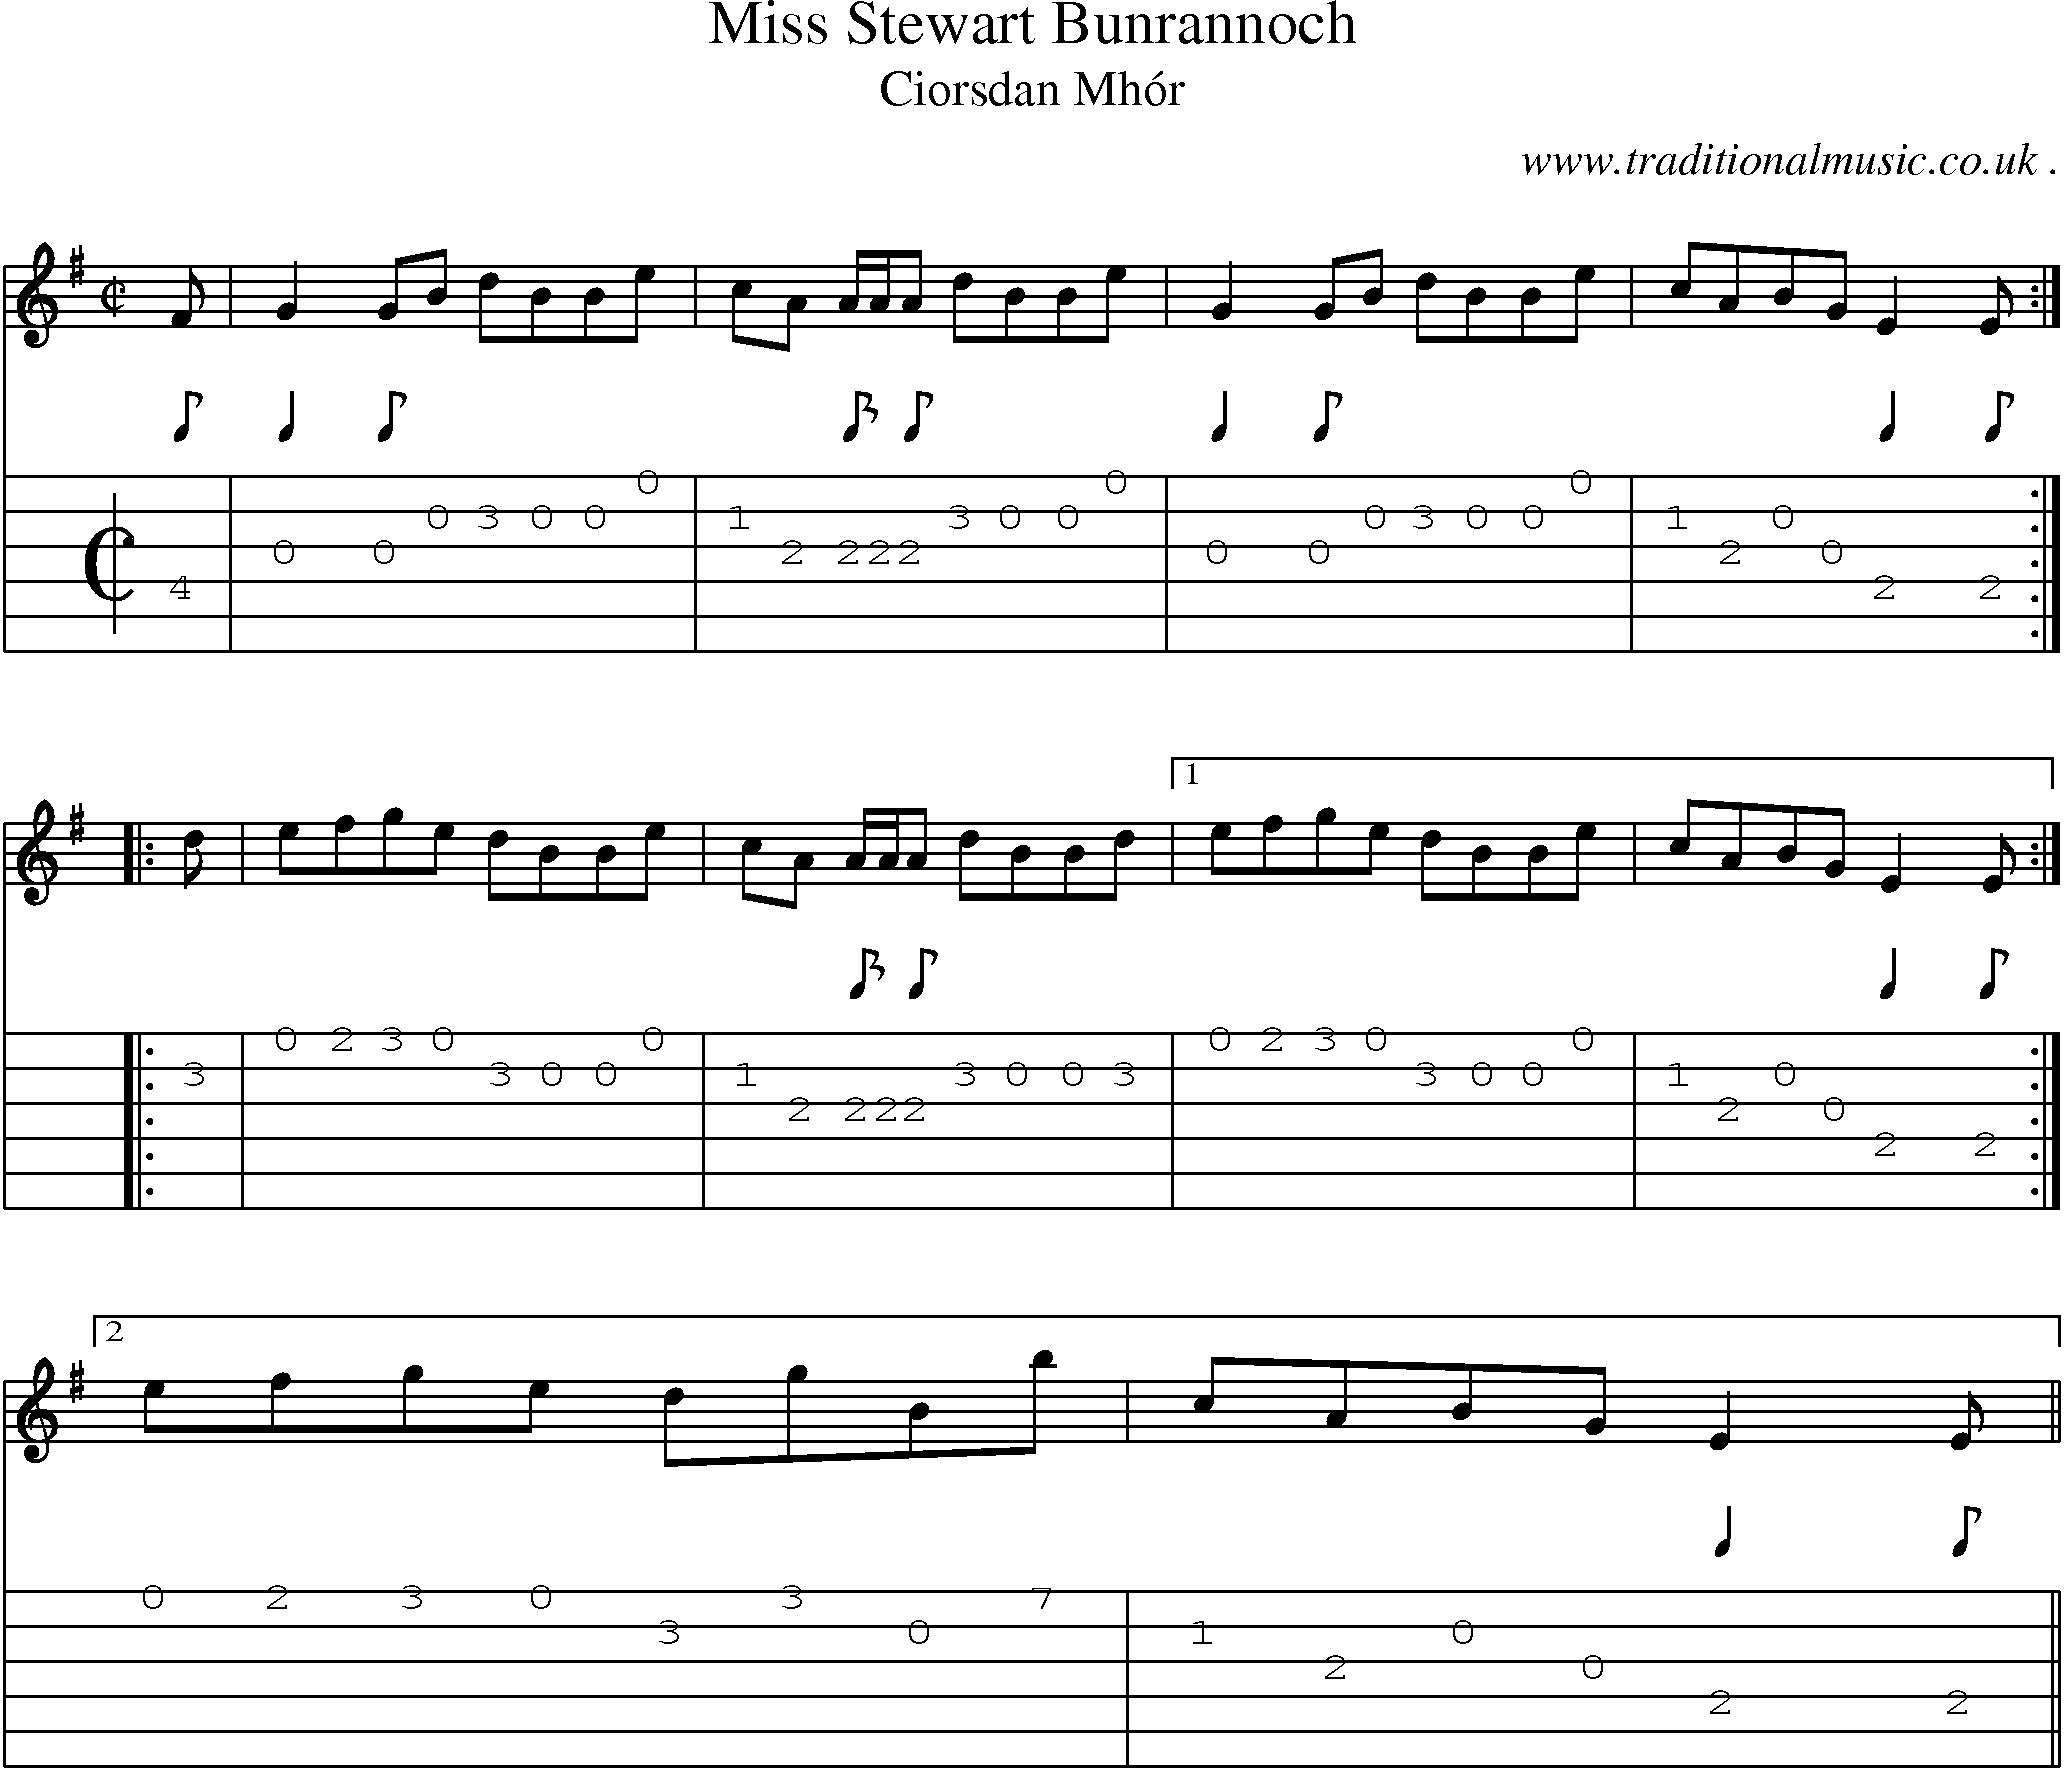 Sheet-music  score, Chords and Guitar Tabs for Miss Stewart Bunrannoch